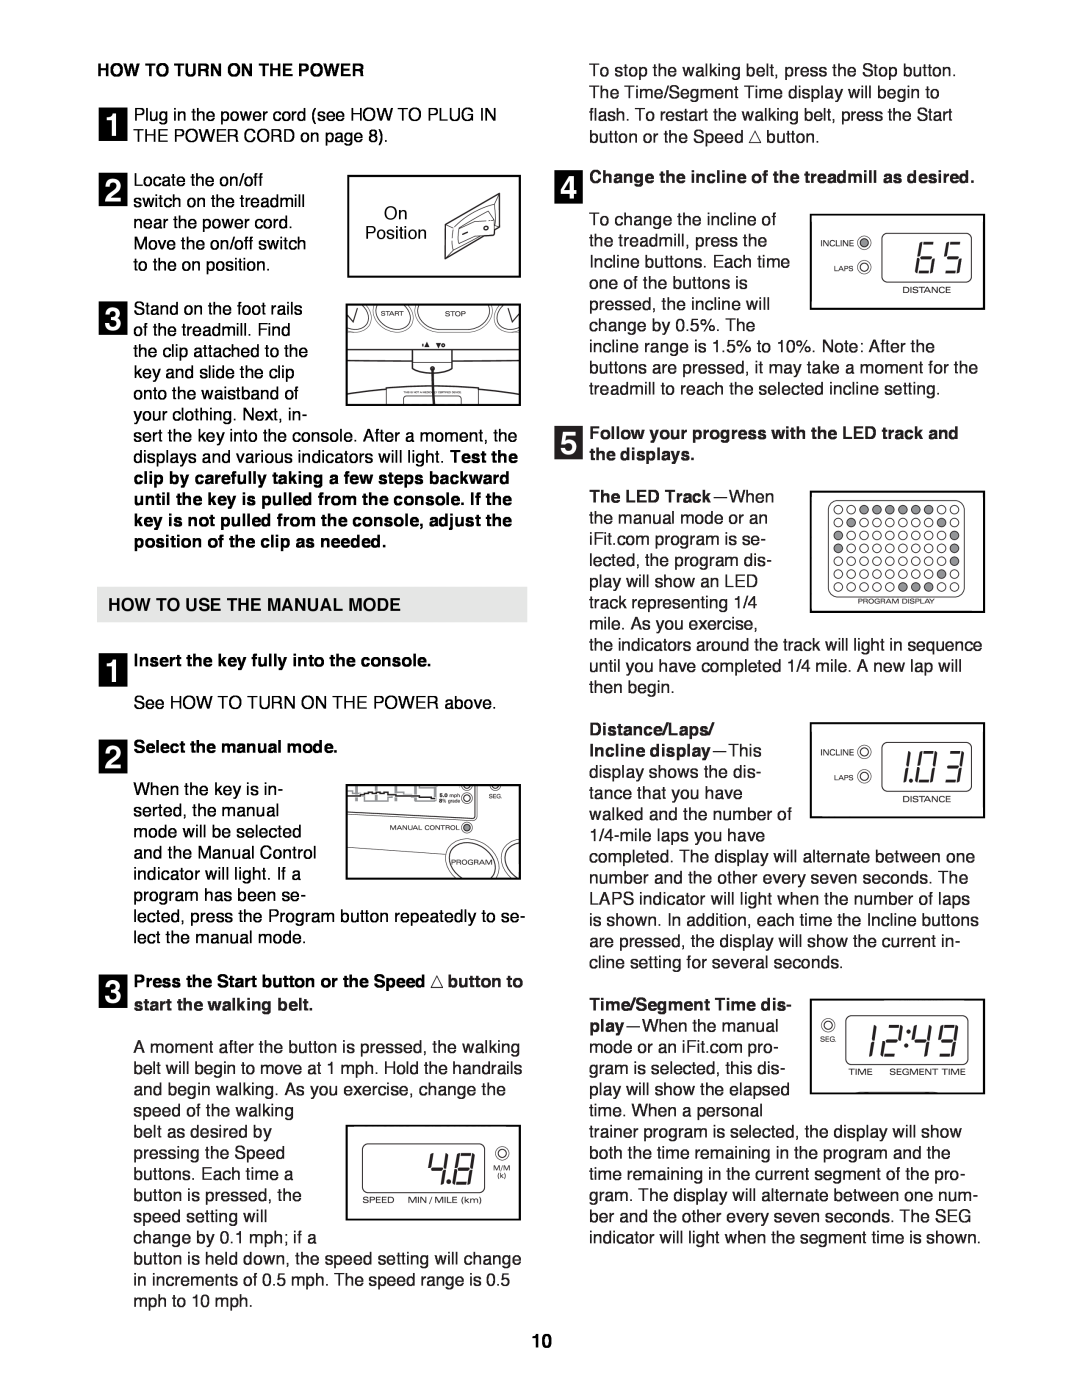 ProForm 785Pi user manual How To Turn On The Power, HOW TO USE THE MANUAL MODE 1 Insert the key fully into the console 